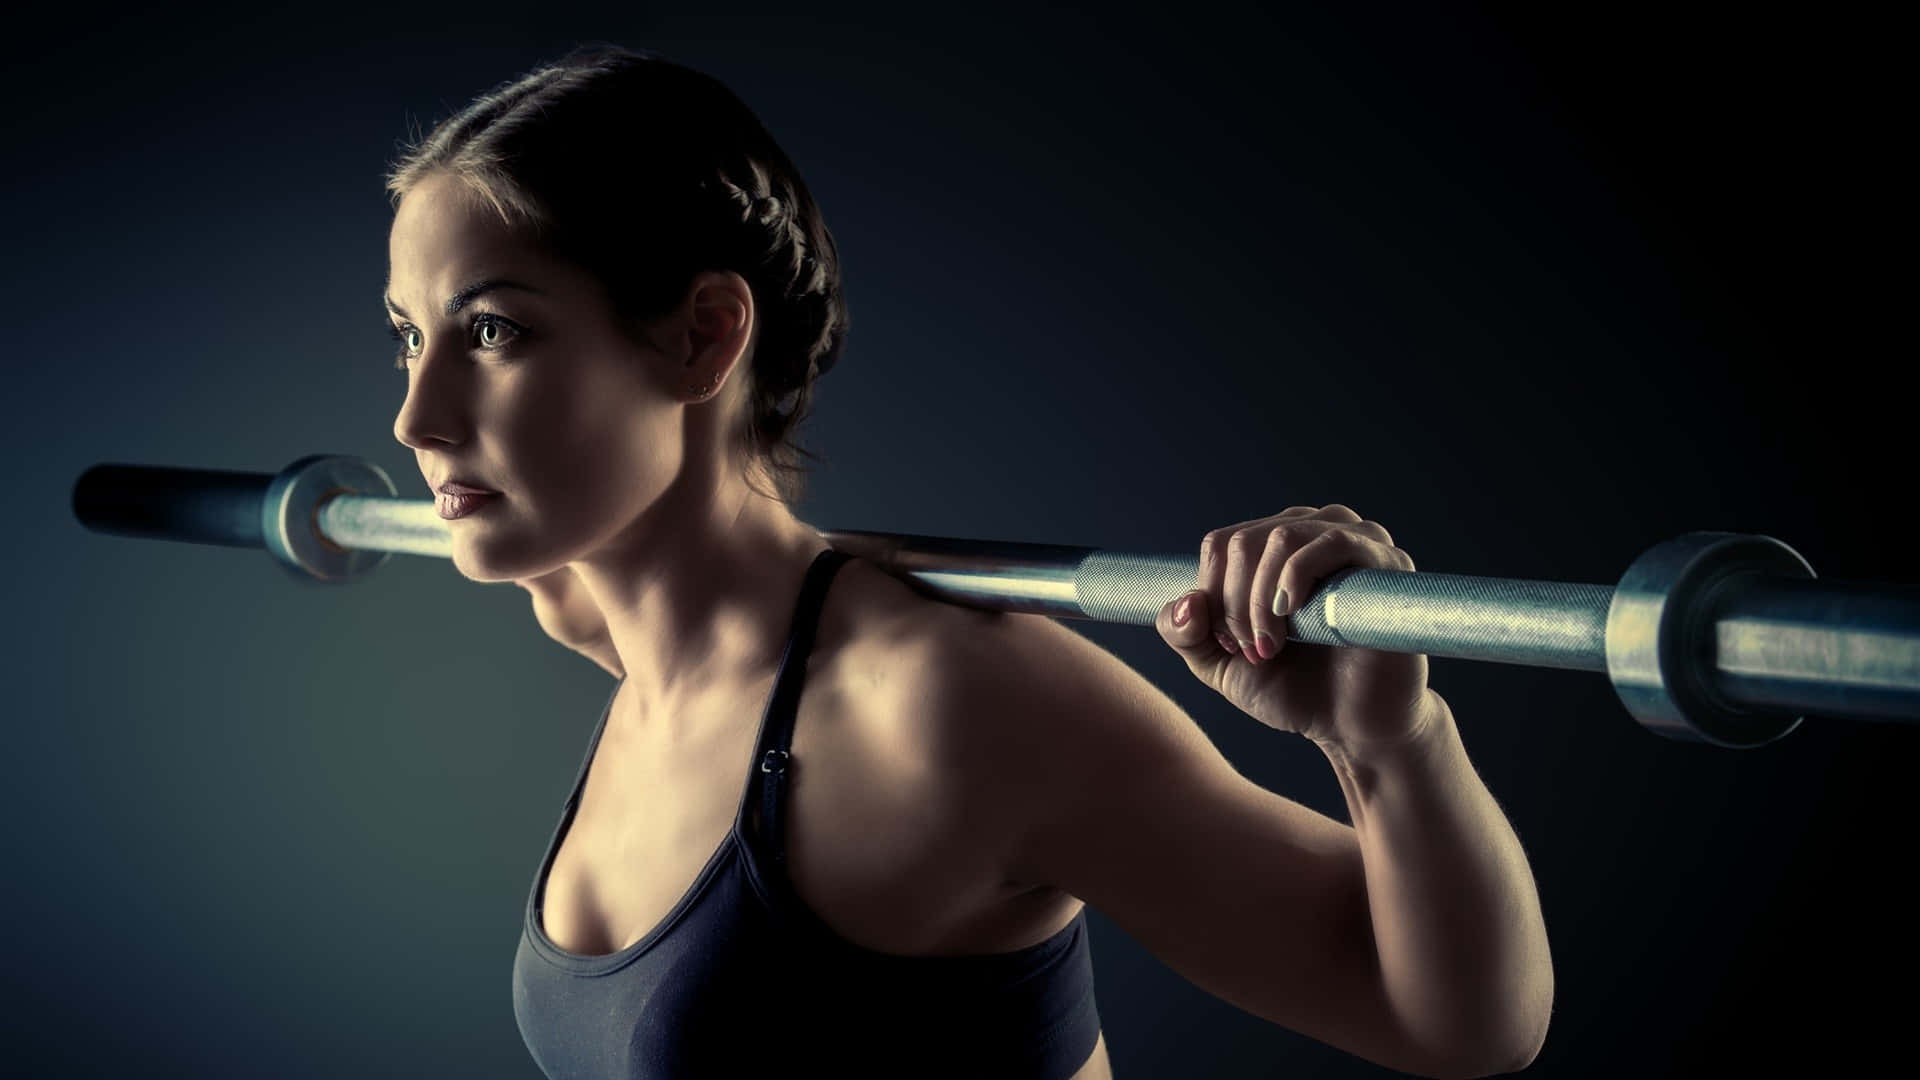 A Woman Is Lifting A Barbell On A Dark Background